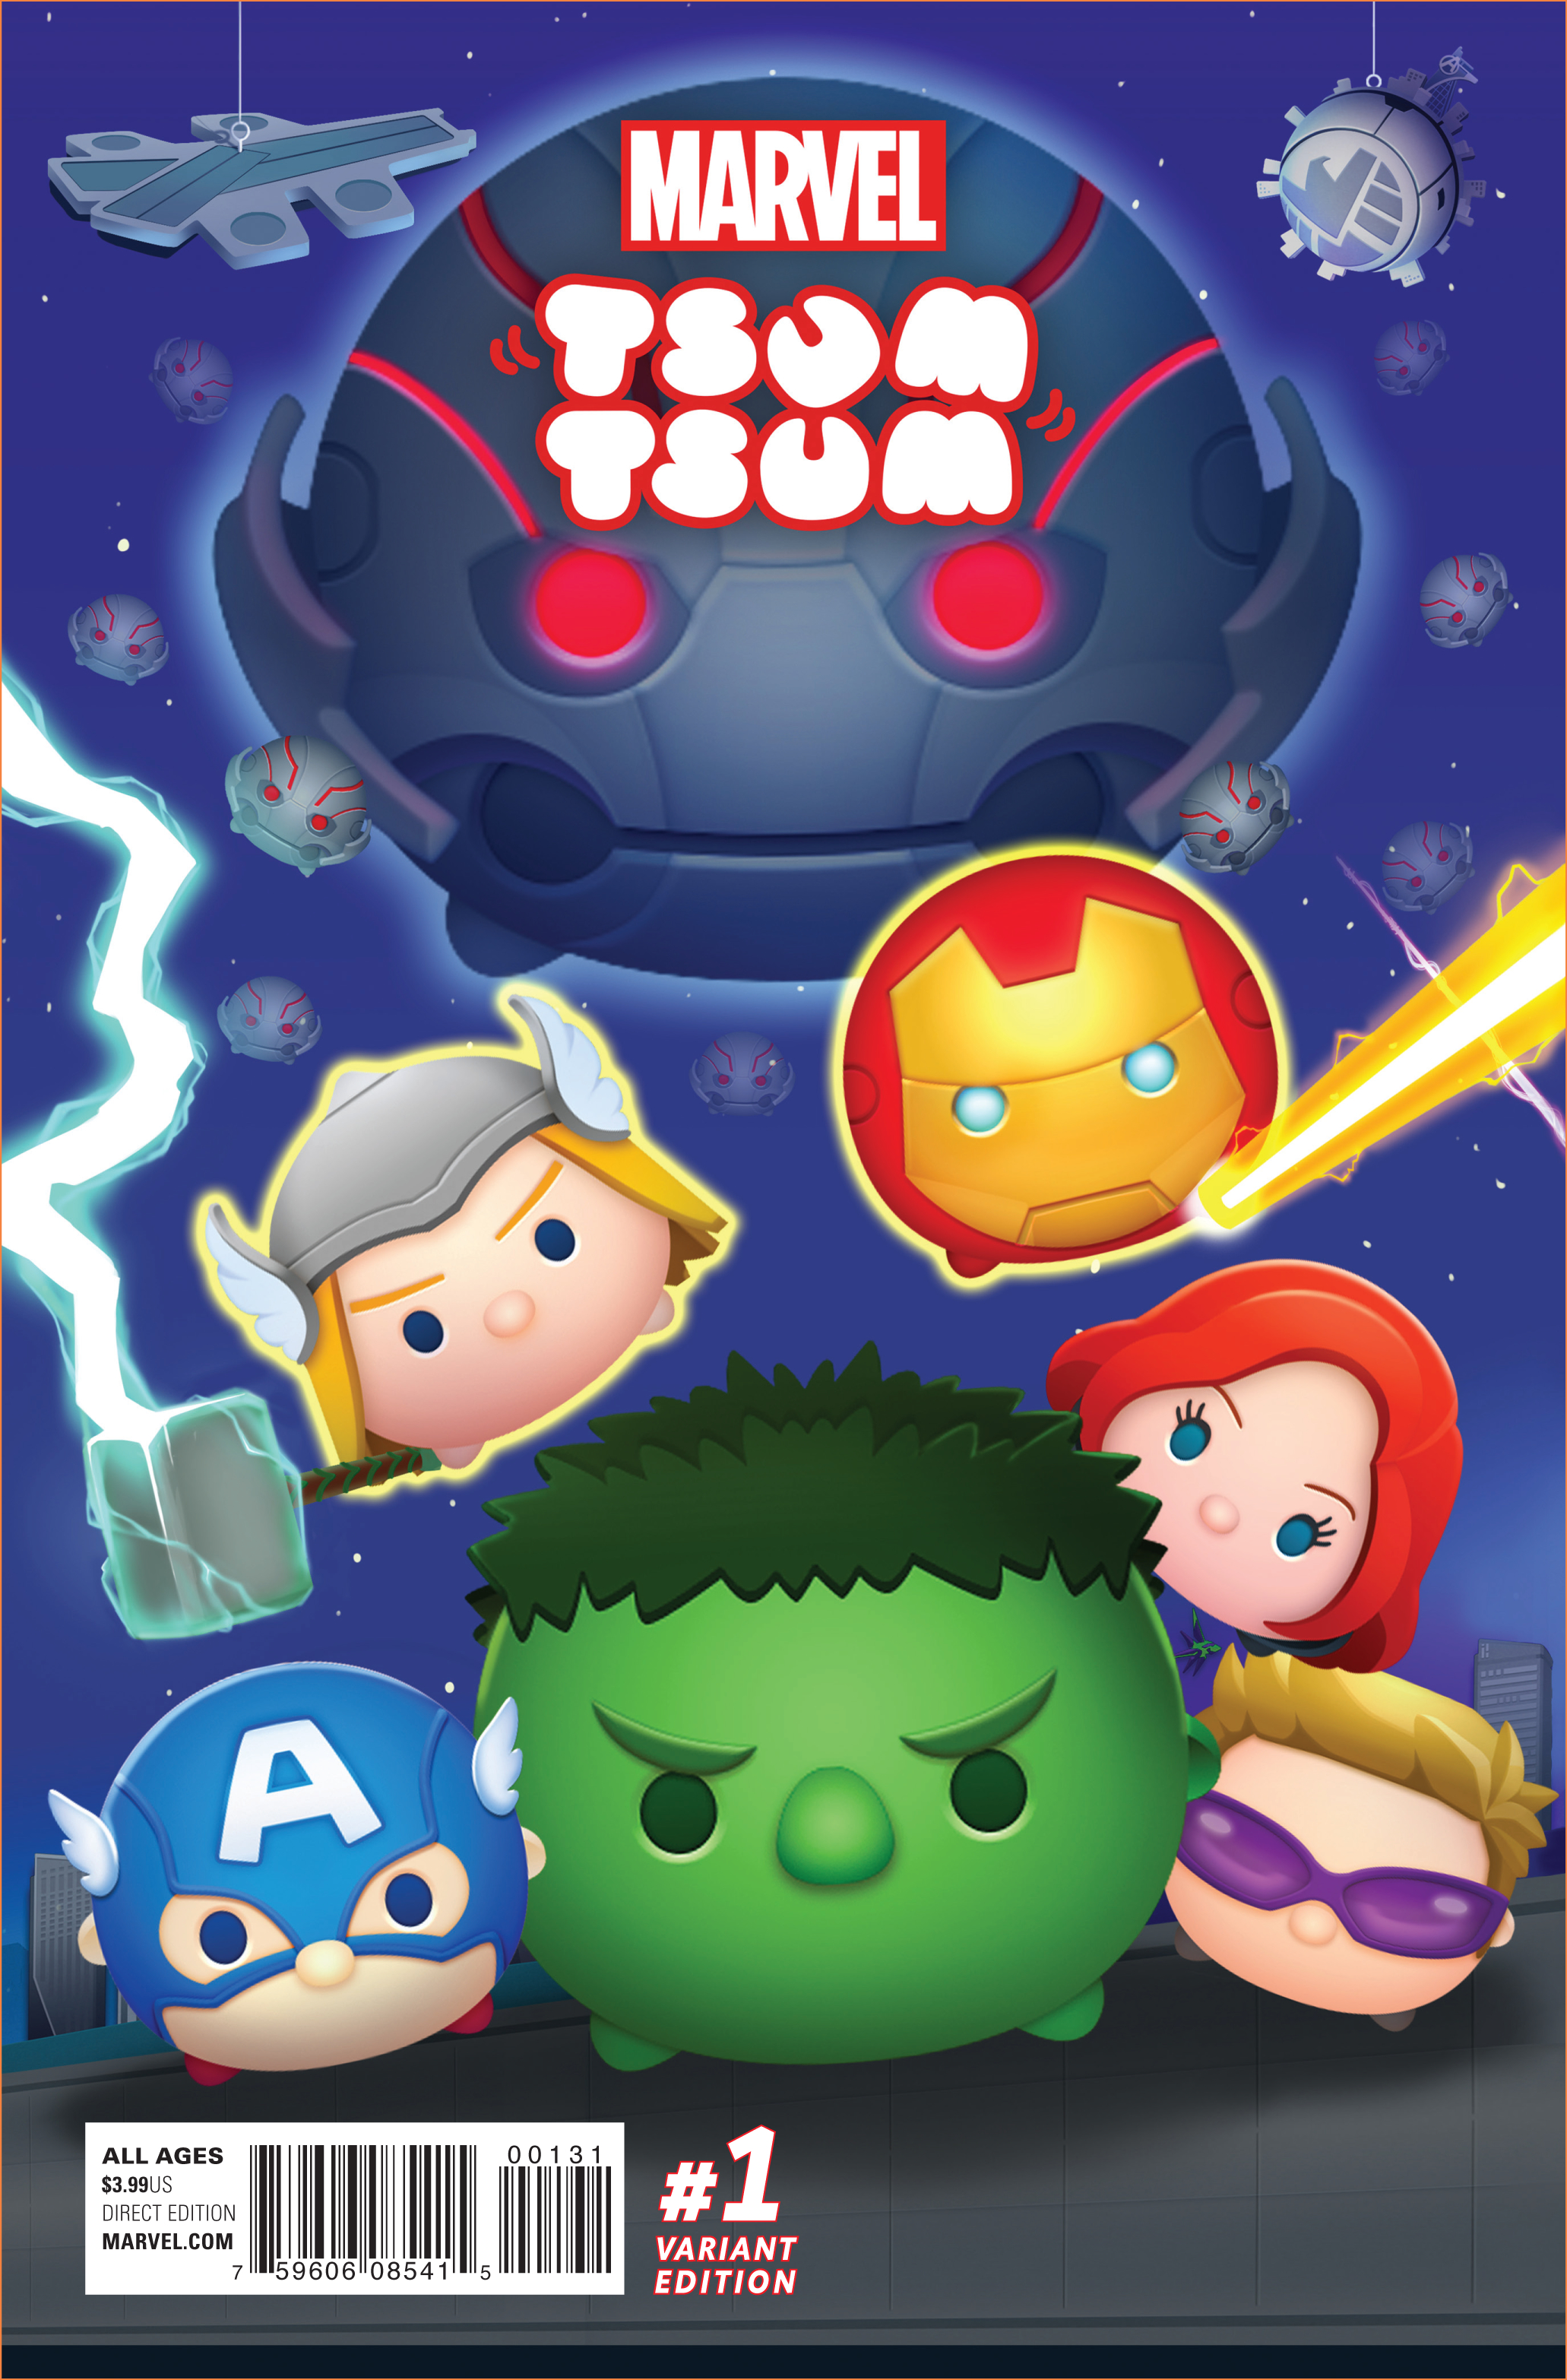 MARVEL TSUM TSUM #1 (OF 4) CLASSIFIED CONNECTING A VAR